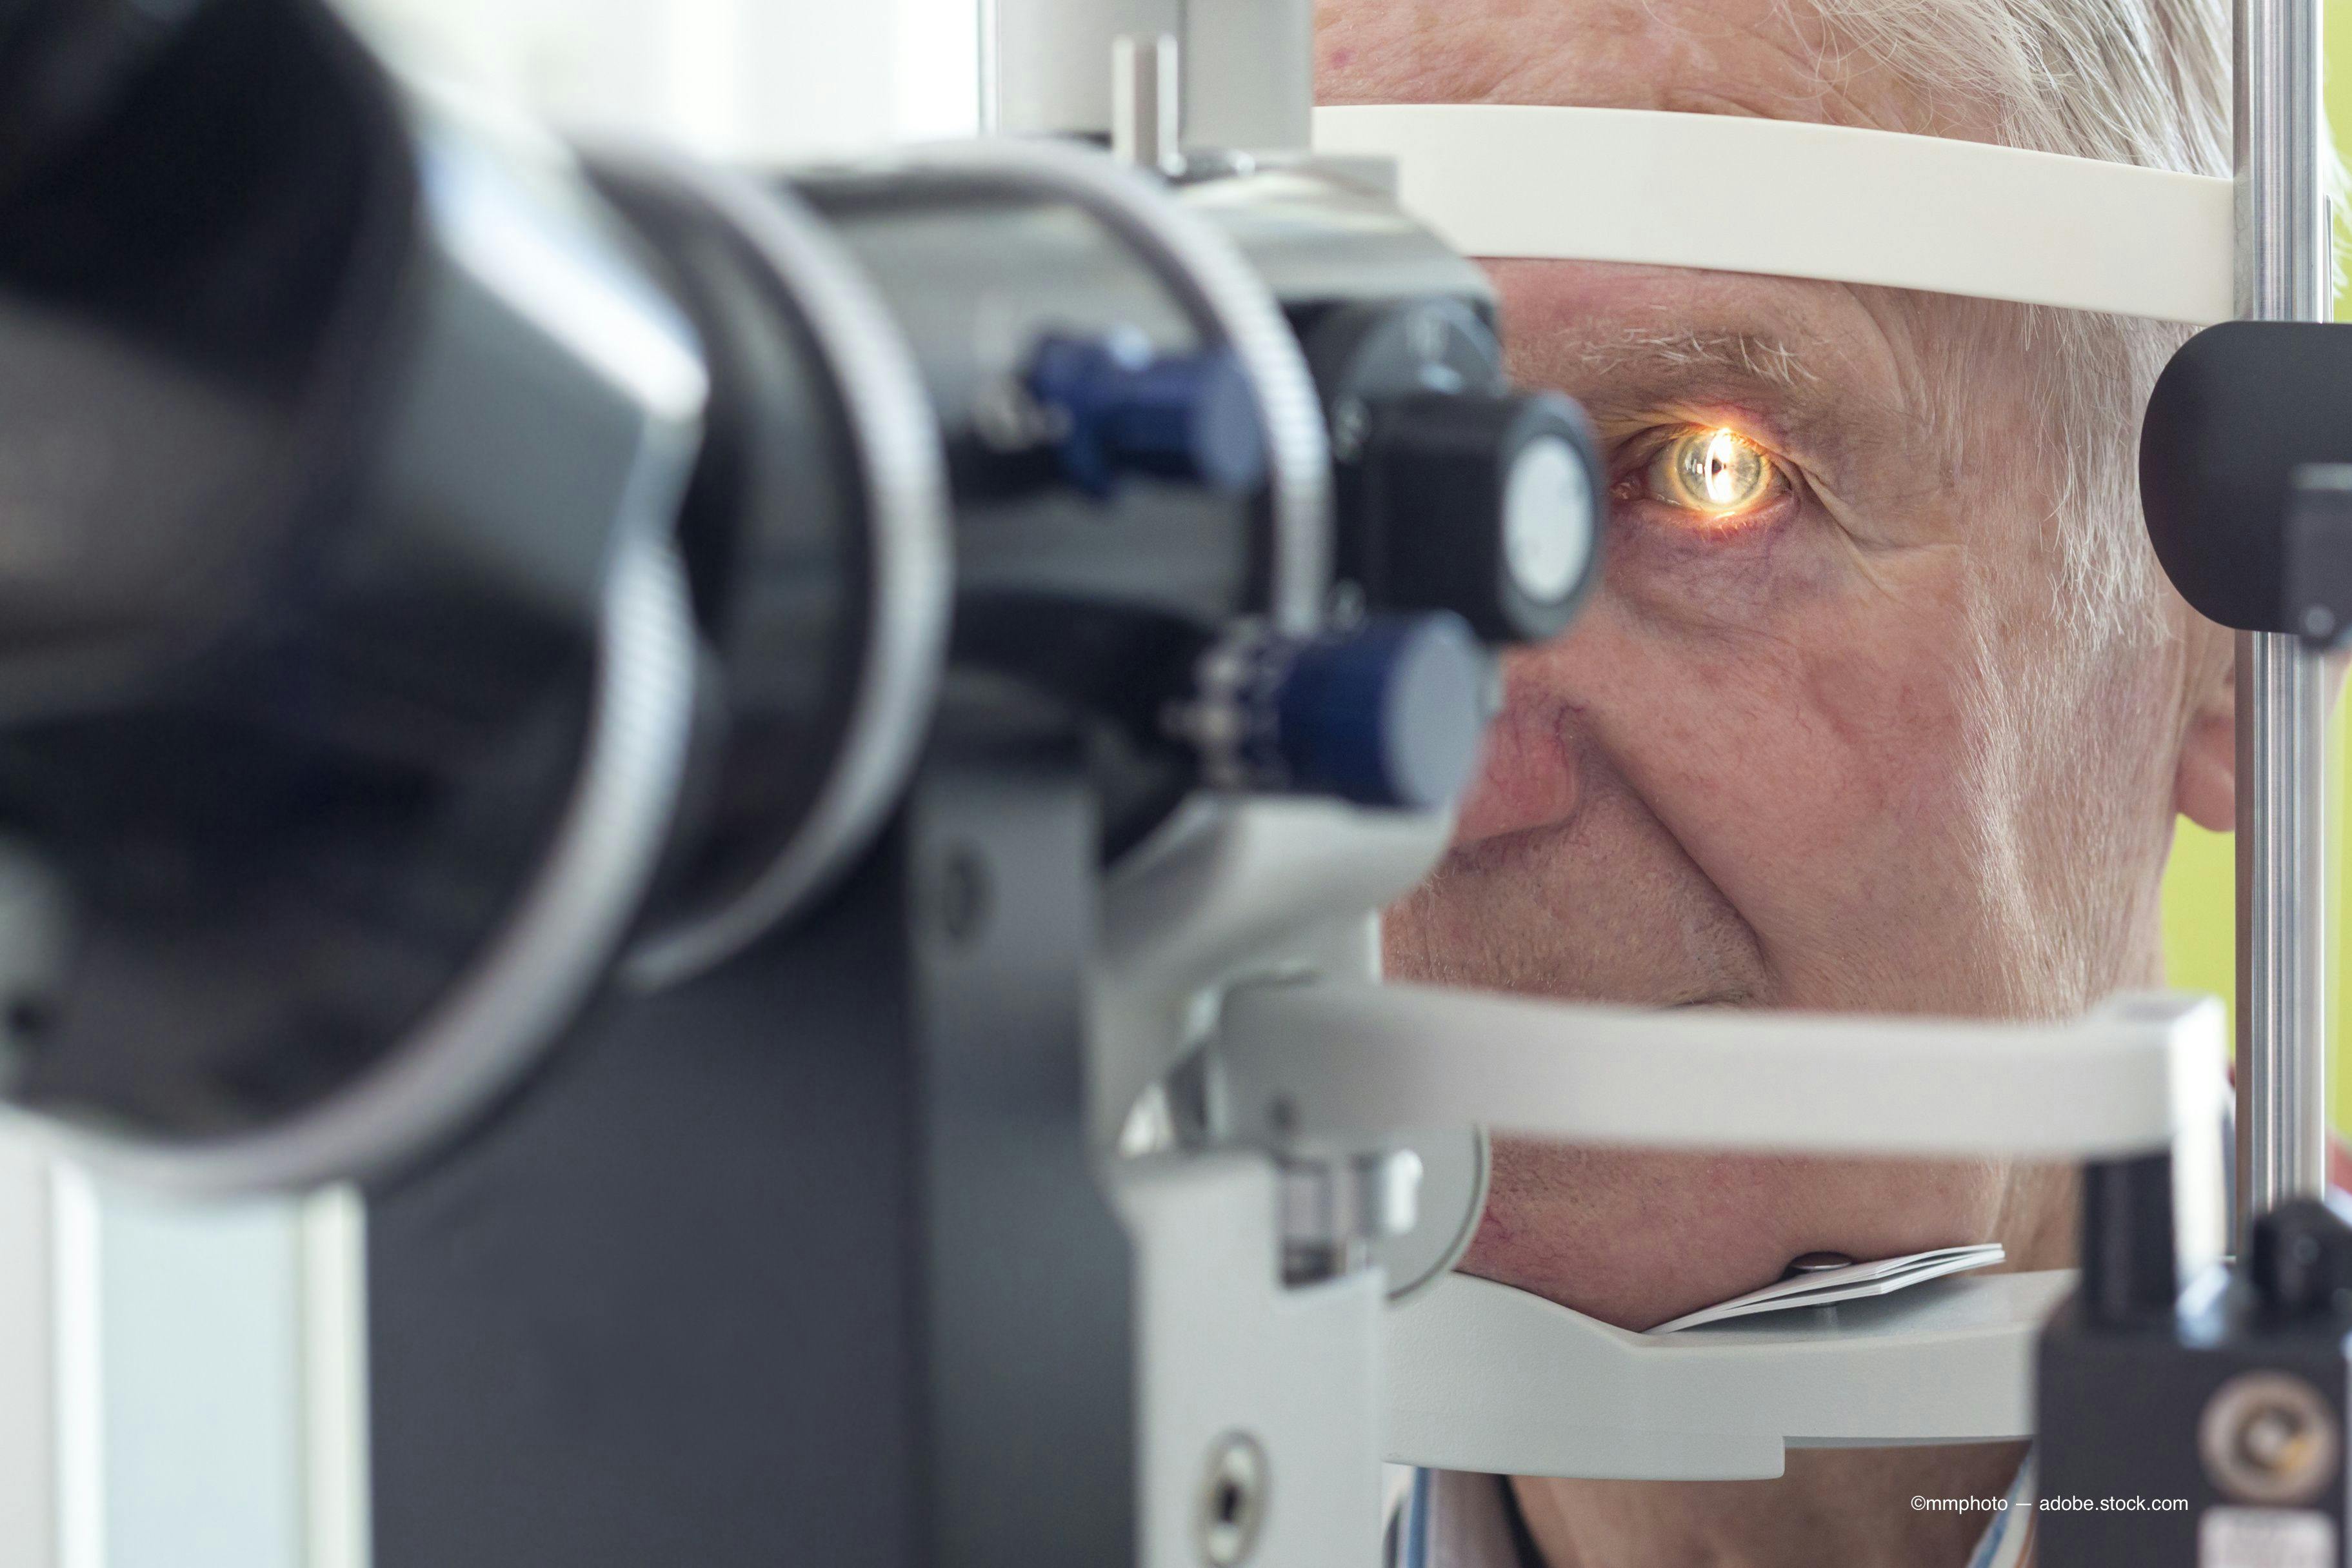  the combined femtosecond laser and phacoemulsification system will be the first system to combine these technologies, changing the paradigm in cataract surgery. (Images courtesy of Adobe Stock)